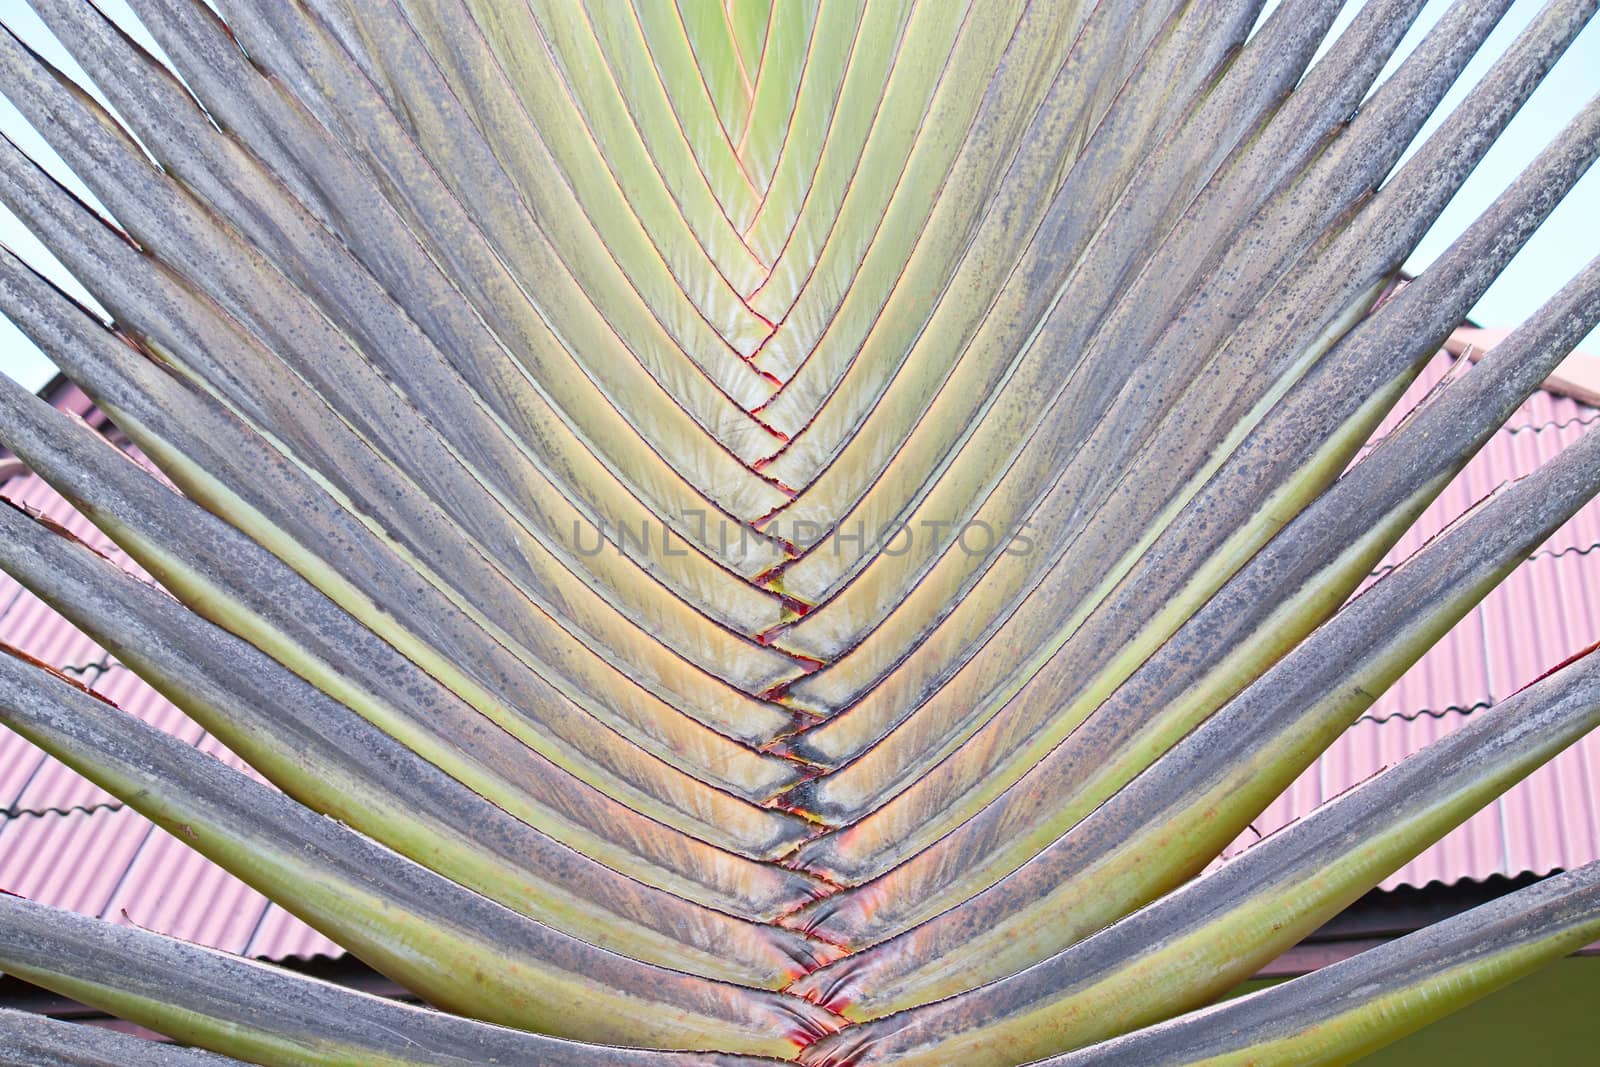 Palm leaves close up against the sky, Thailand.